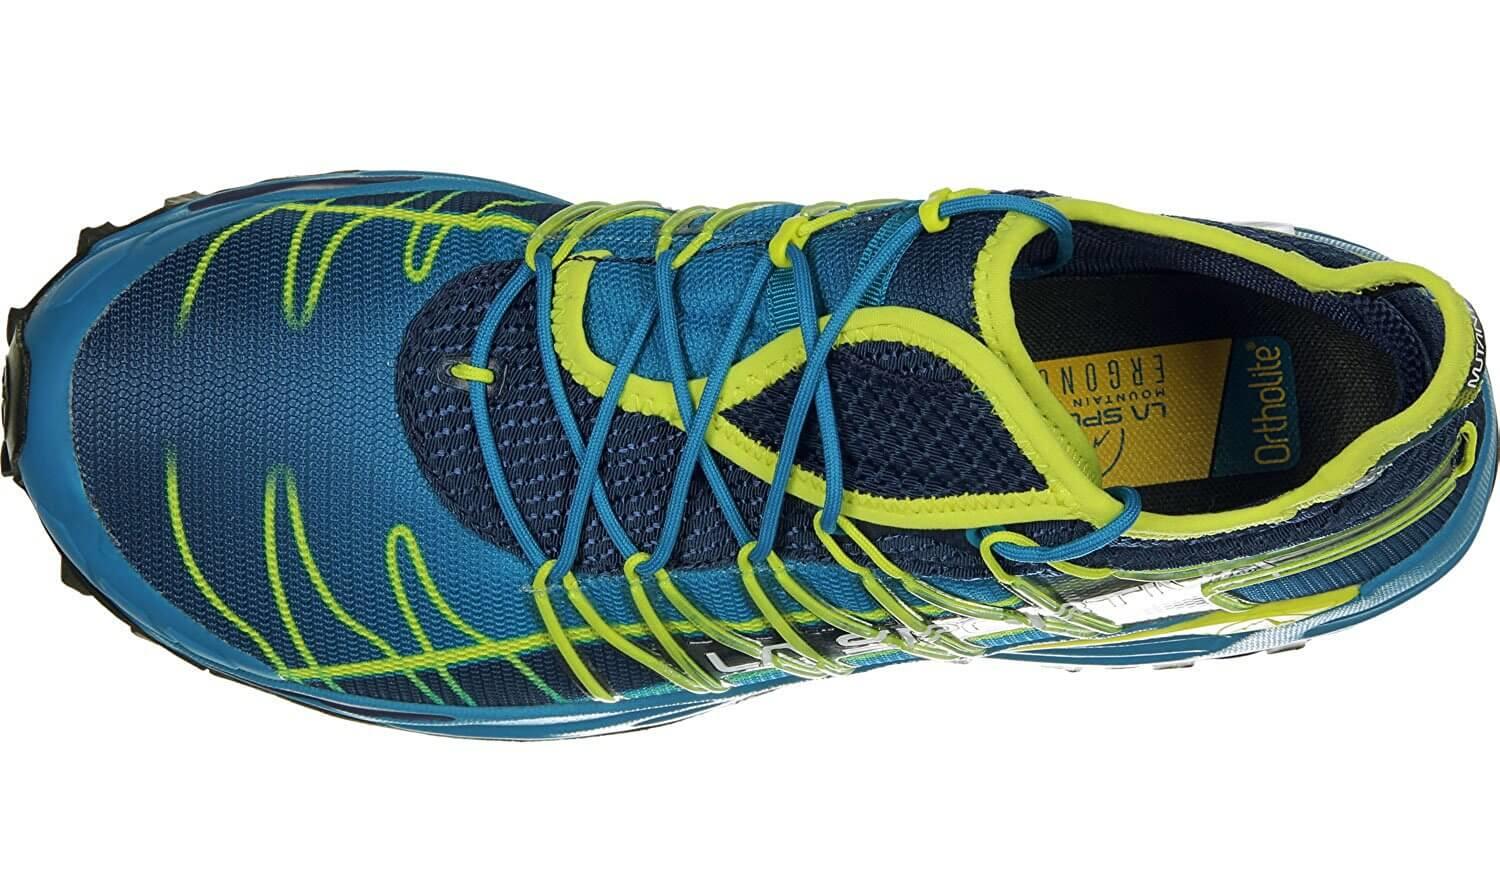 the outsole of the La Sportiva Mutant is breathable and features a snug, comfortable fit